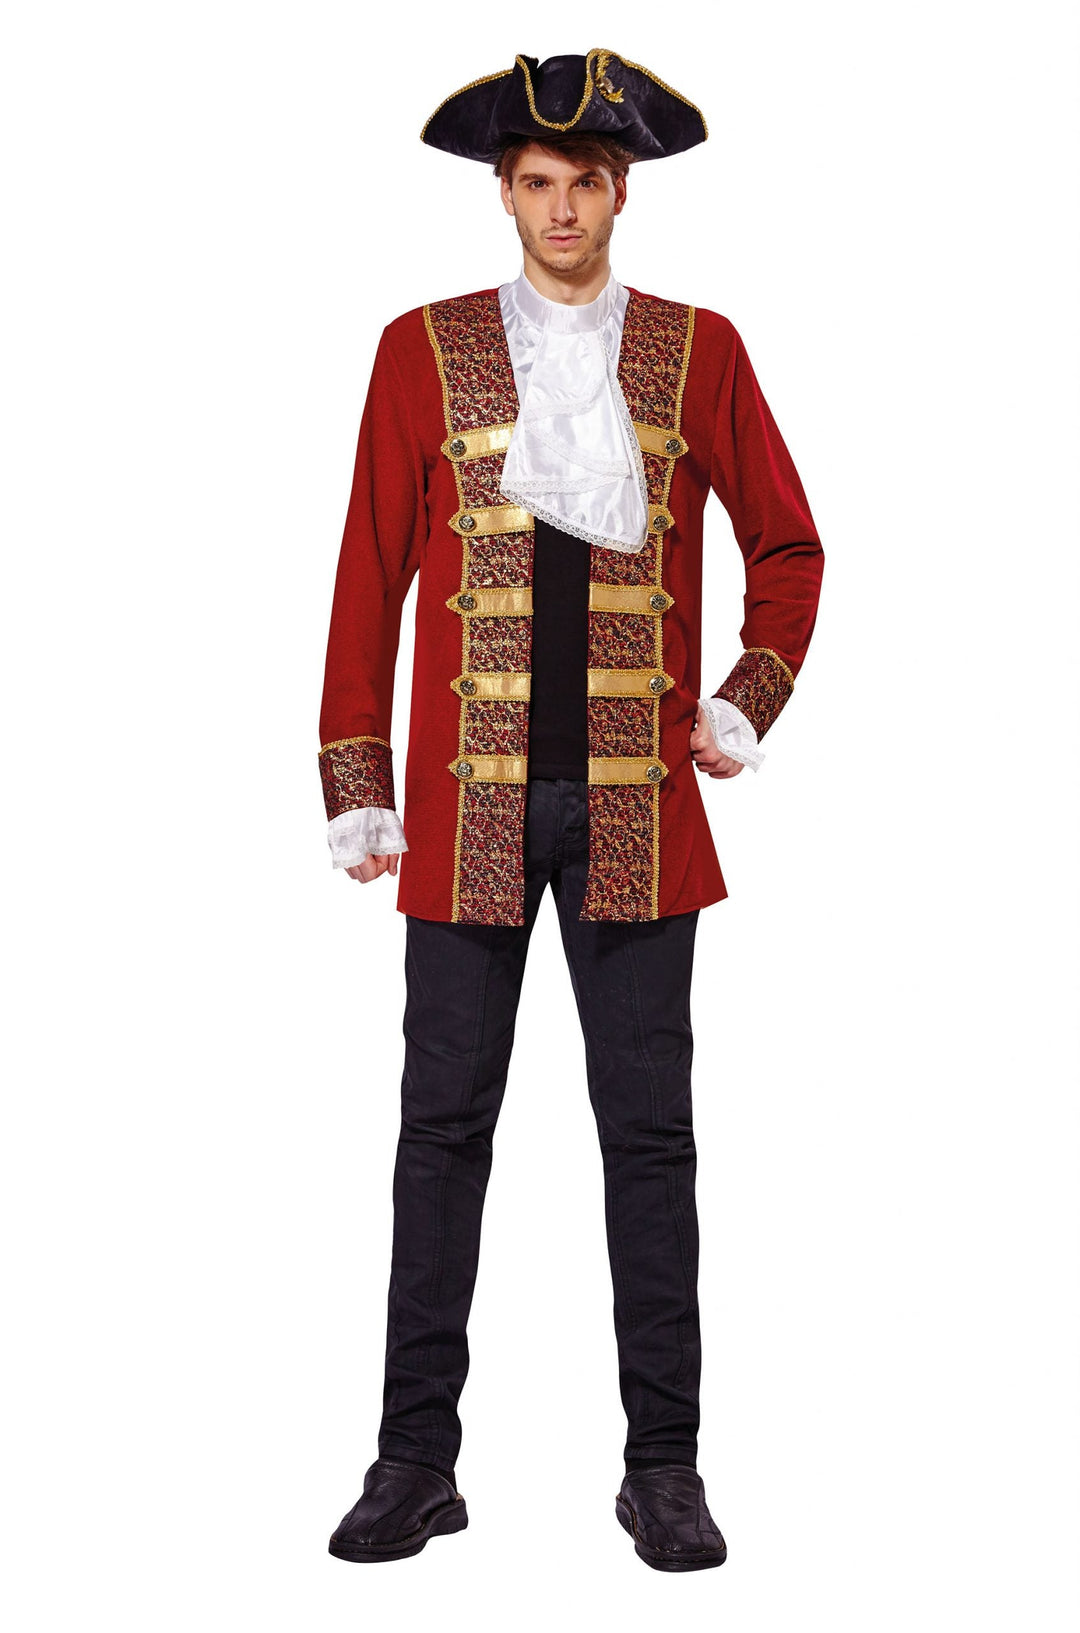 Pirate Coat Red With Attached Cuffs Jabot Adult Costume Chest Size 44"_1